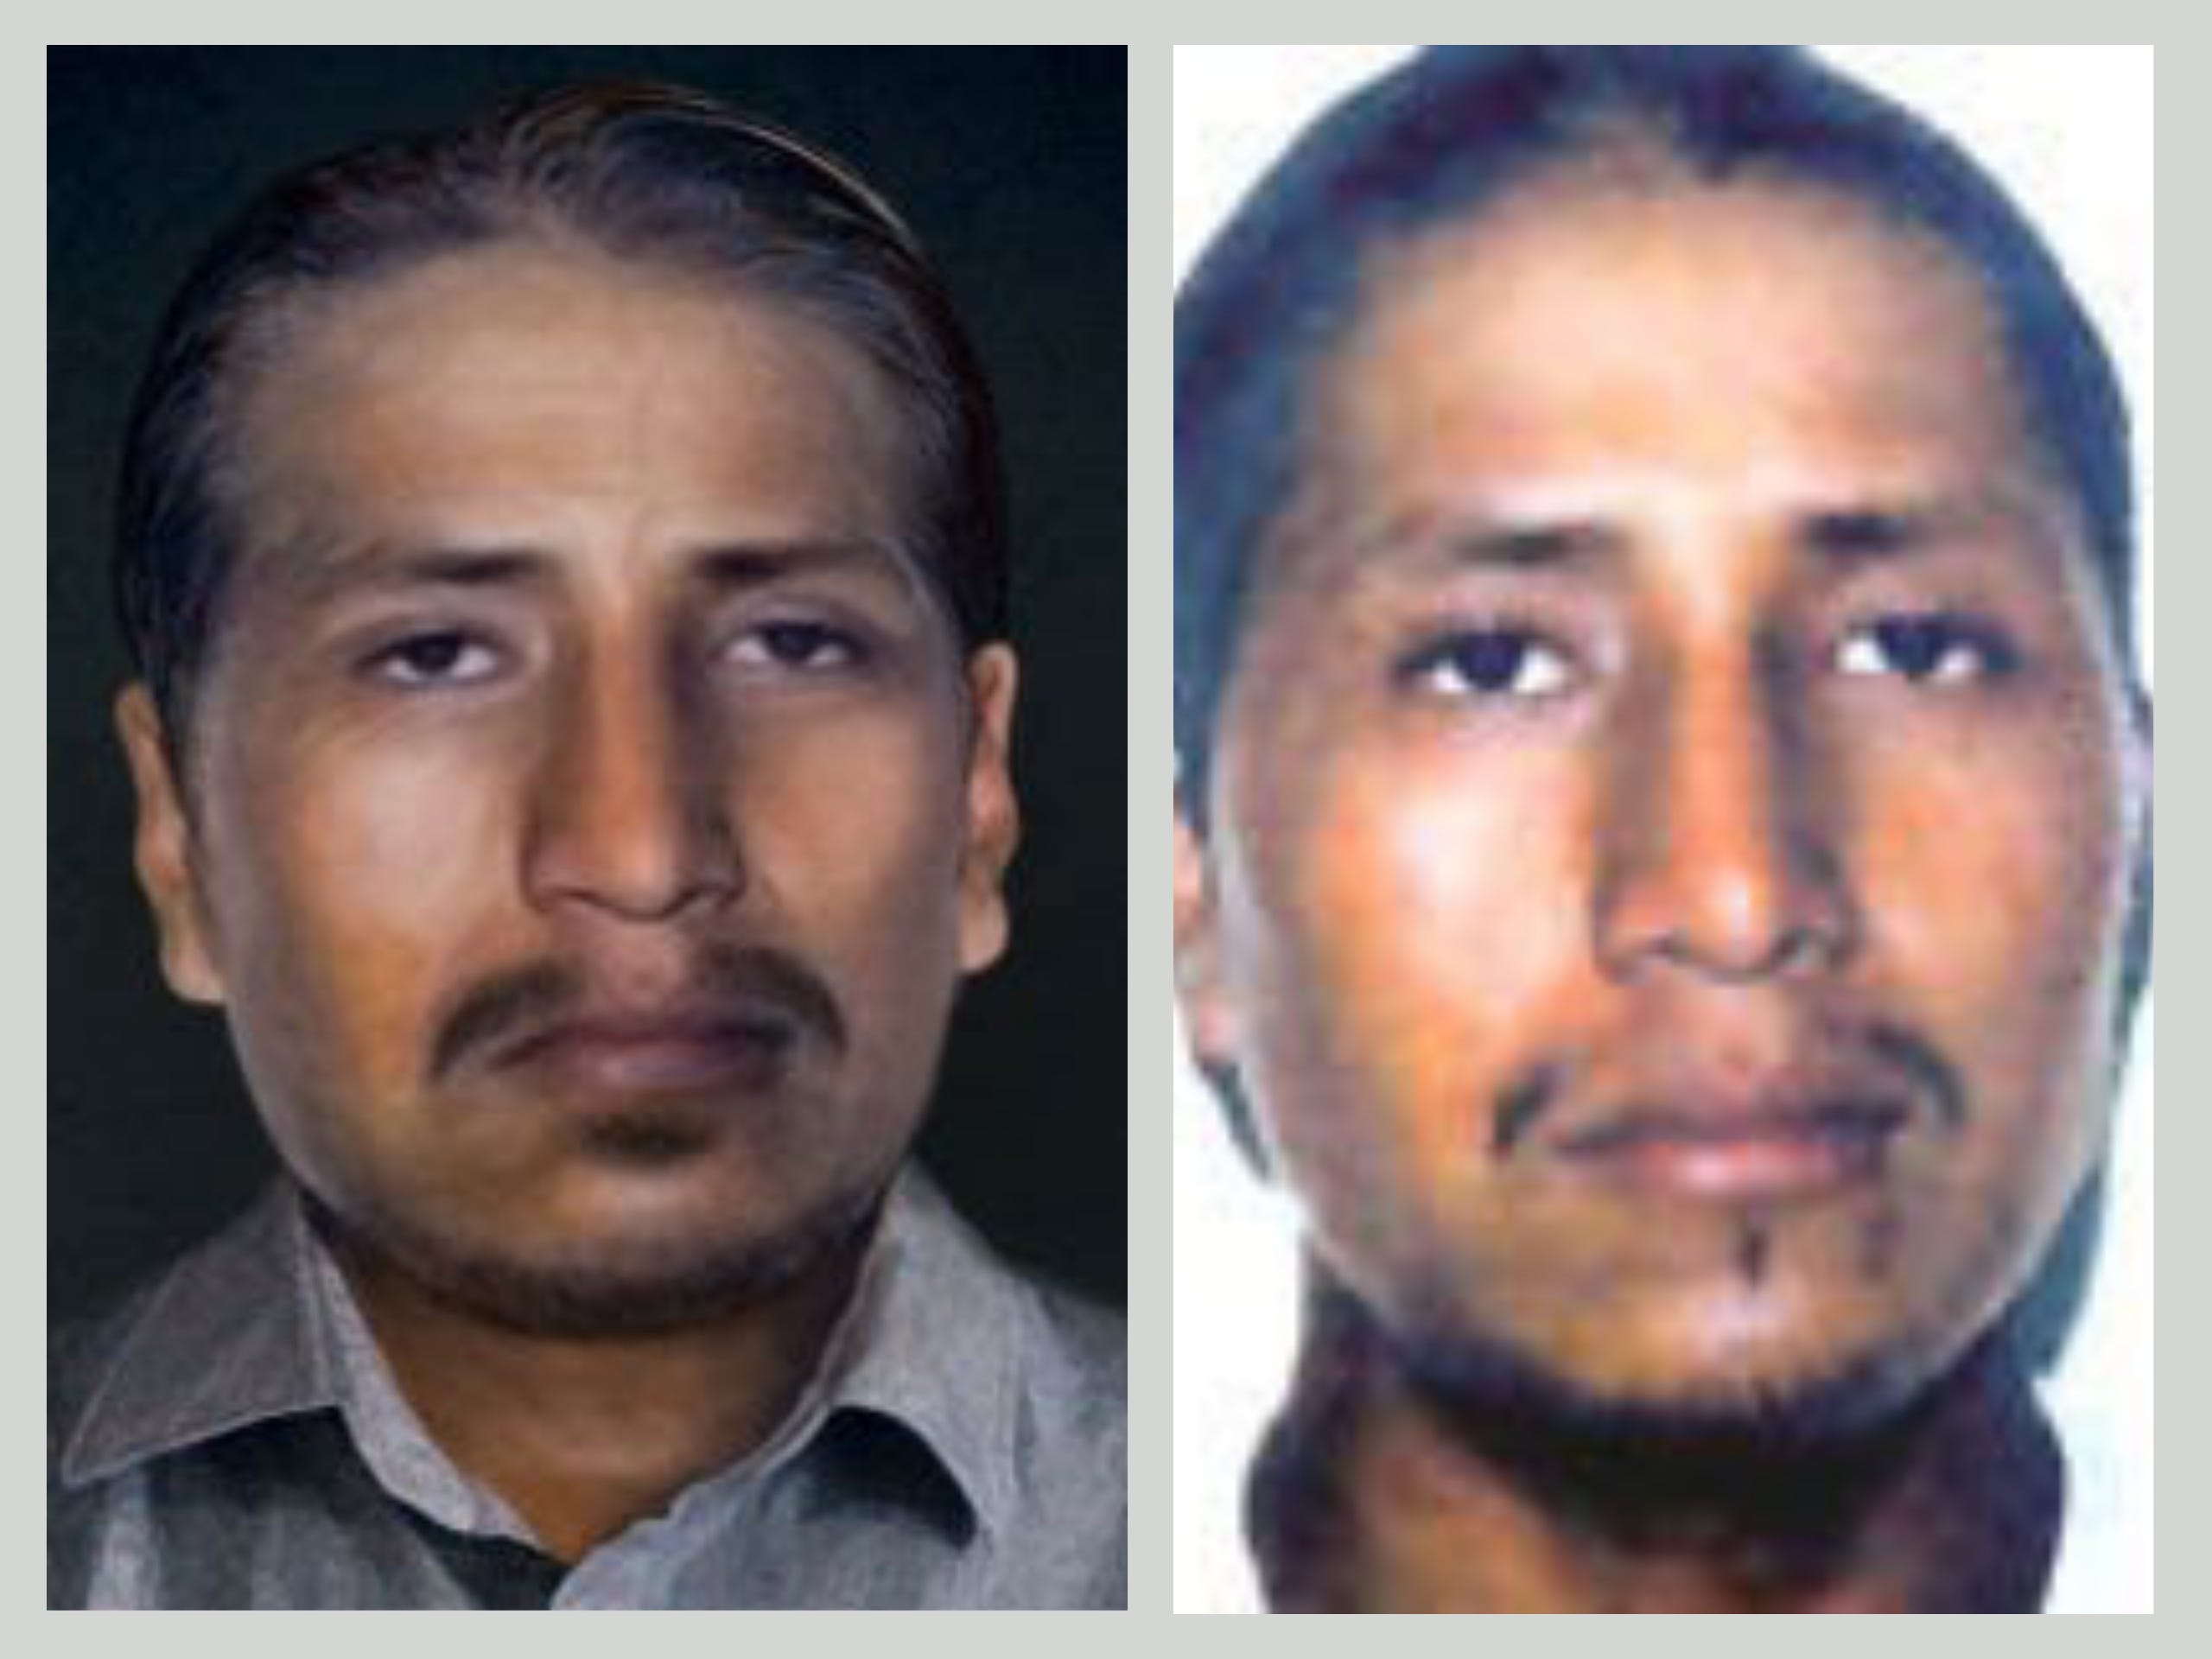 Felipe Santos in age progressed image and before he disappeared in October 2003.